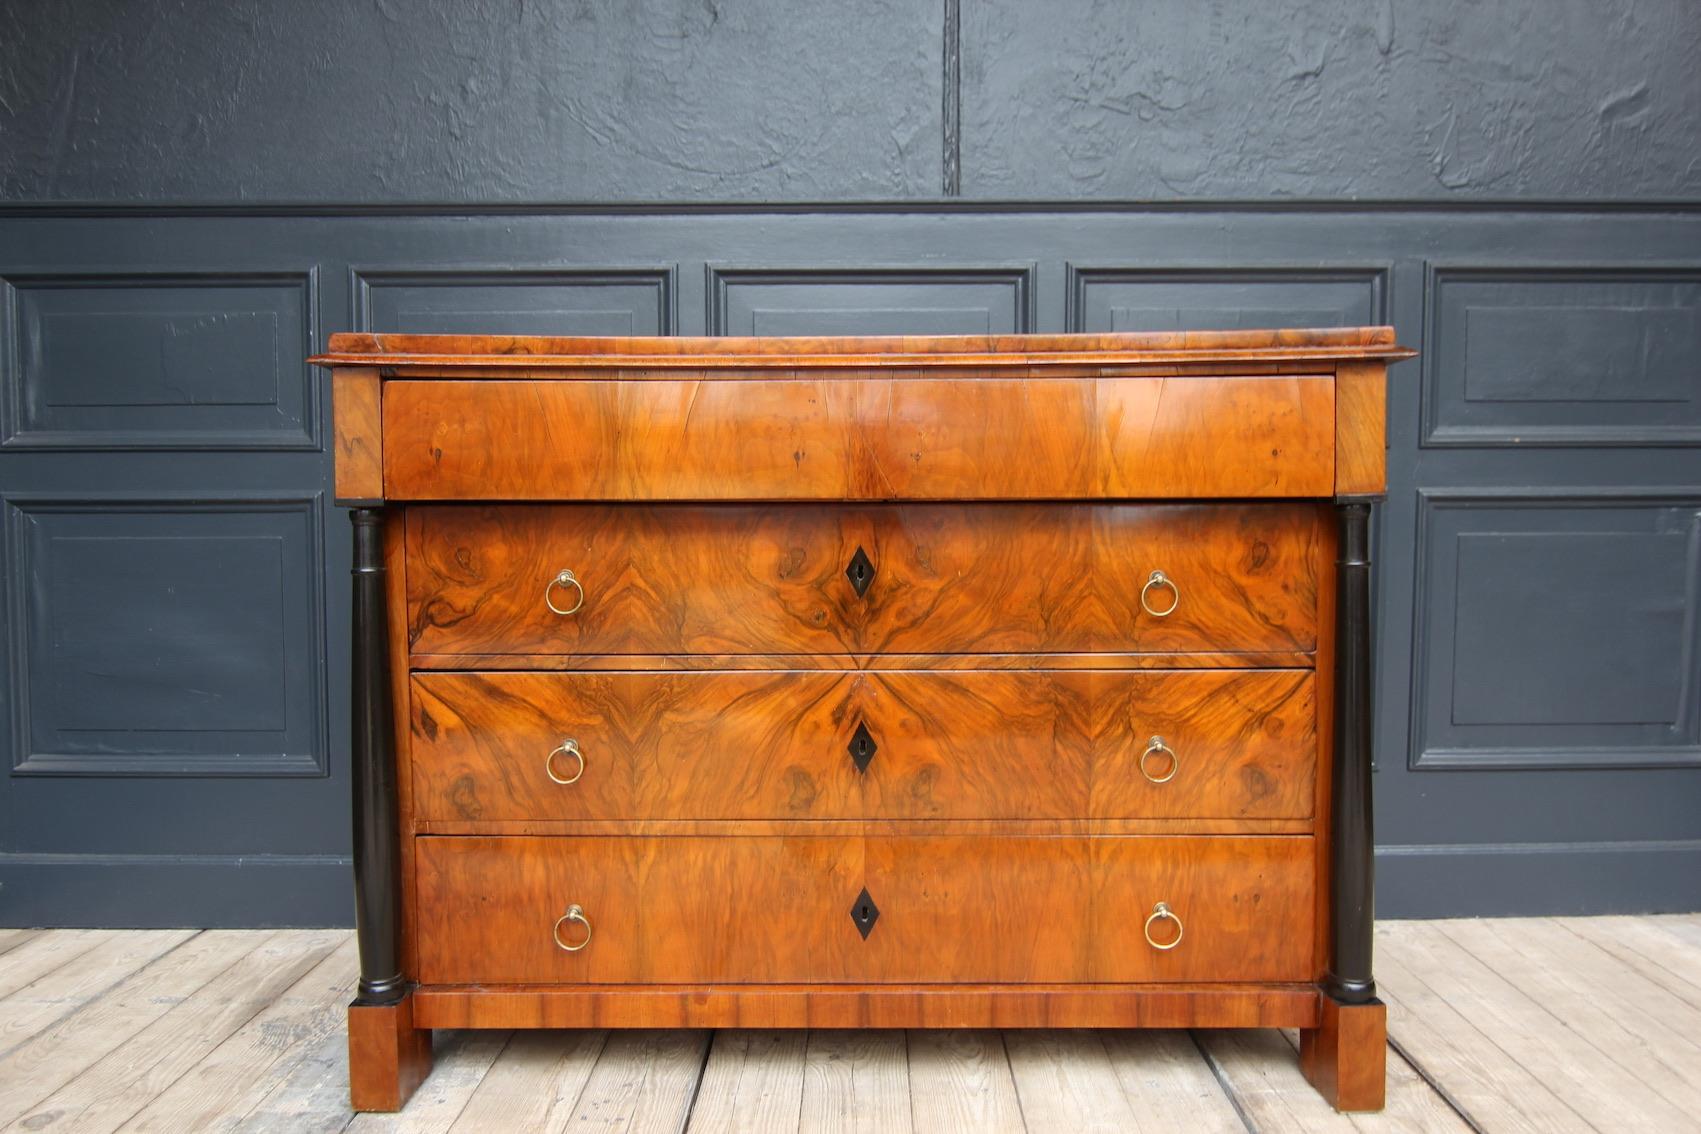 Classic Biedermeier column chest of drawers. South German, around 1820.

Walnut veneered on softwood.

A four-sided corpus standing on block feet with a slightly overhanging profiled top plate and ebonised set Tuscan full columns.
Extended head